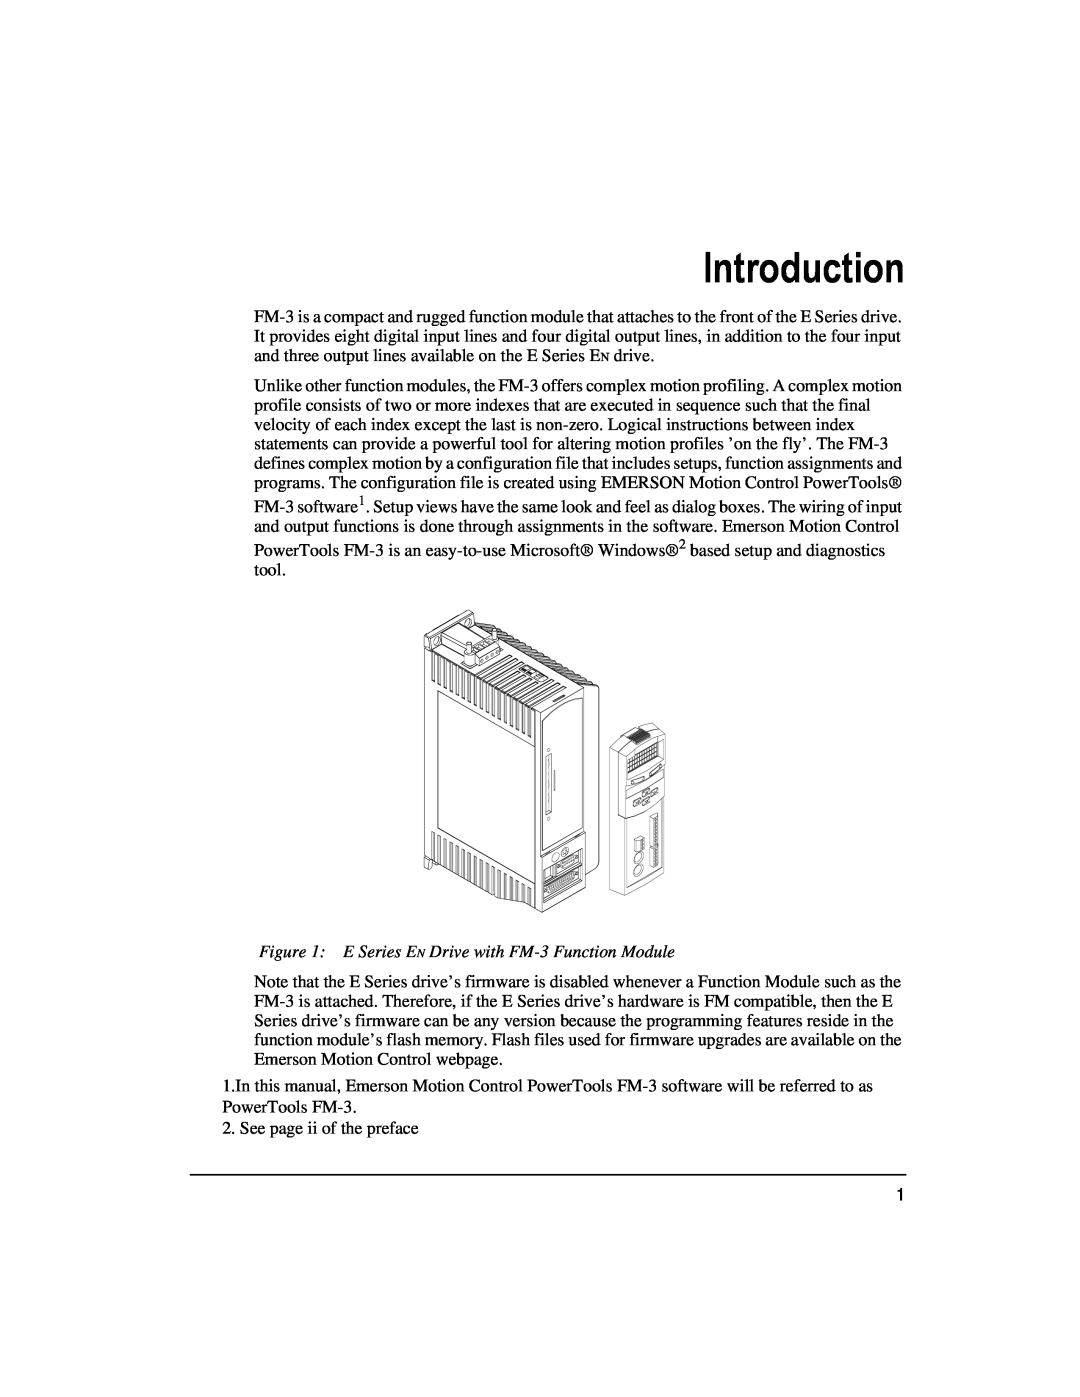 Emerson 400508-02 installation manual Introduction, E Series EN Drive with FM-3 Function Module 